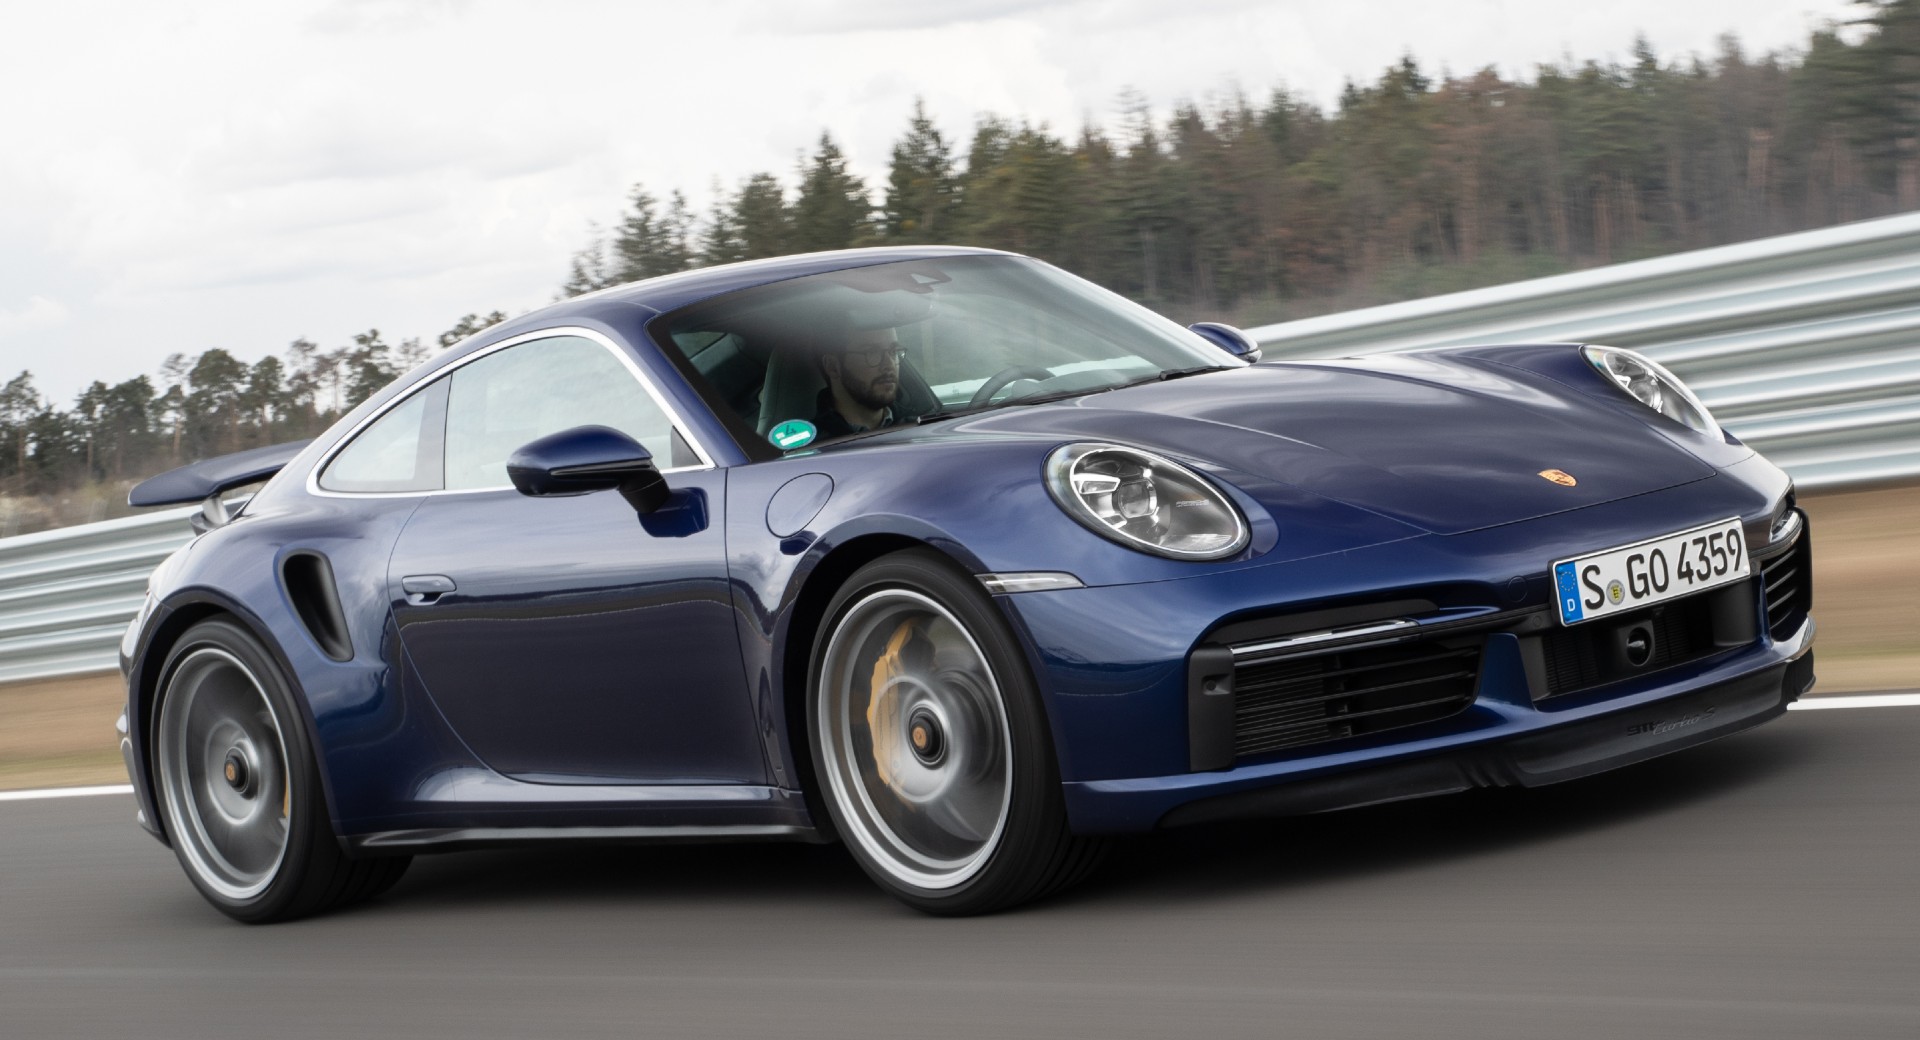 The 2021 Porsche 911 Turbo S Lightweight Does 0-60 In 2.1 Seconds